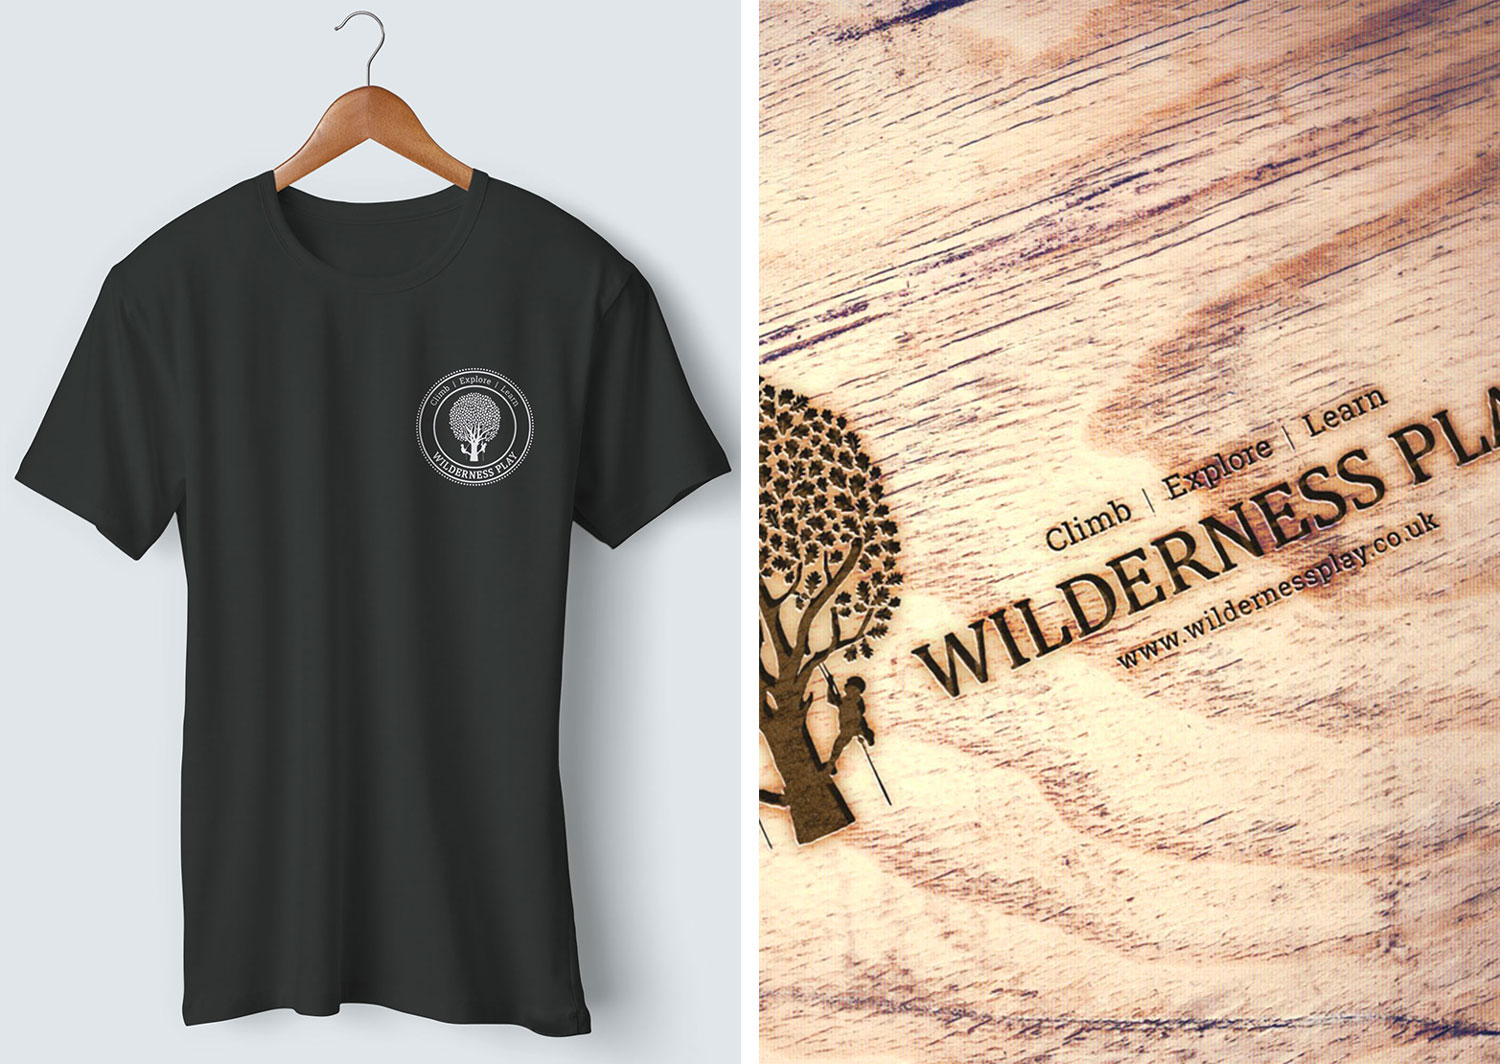 Logo application on t shirt and wooden signage